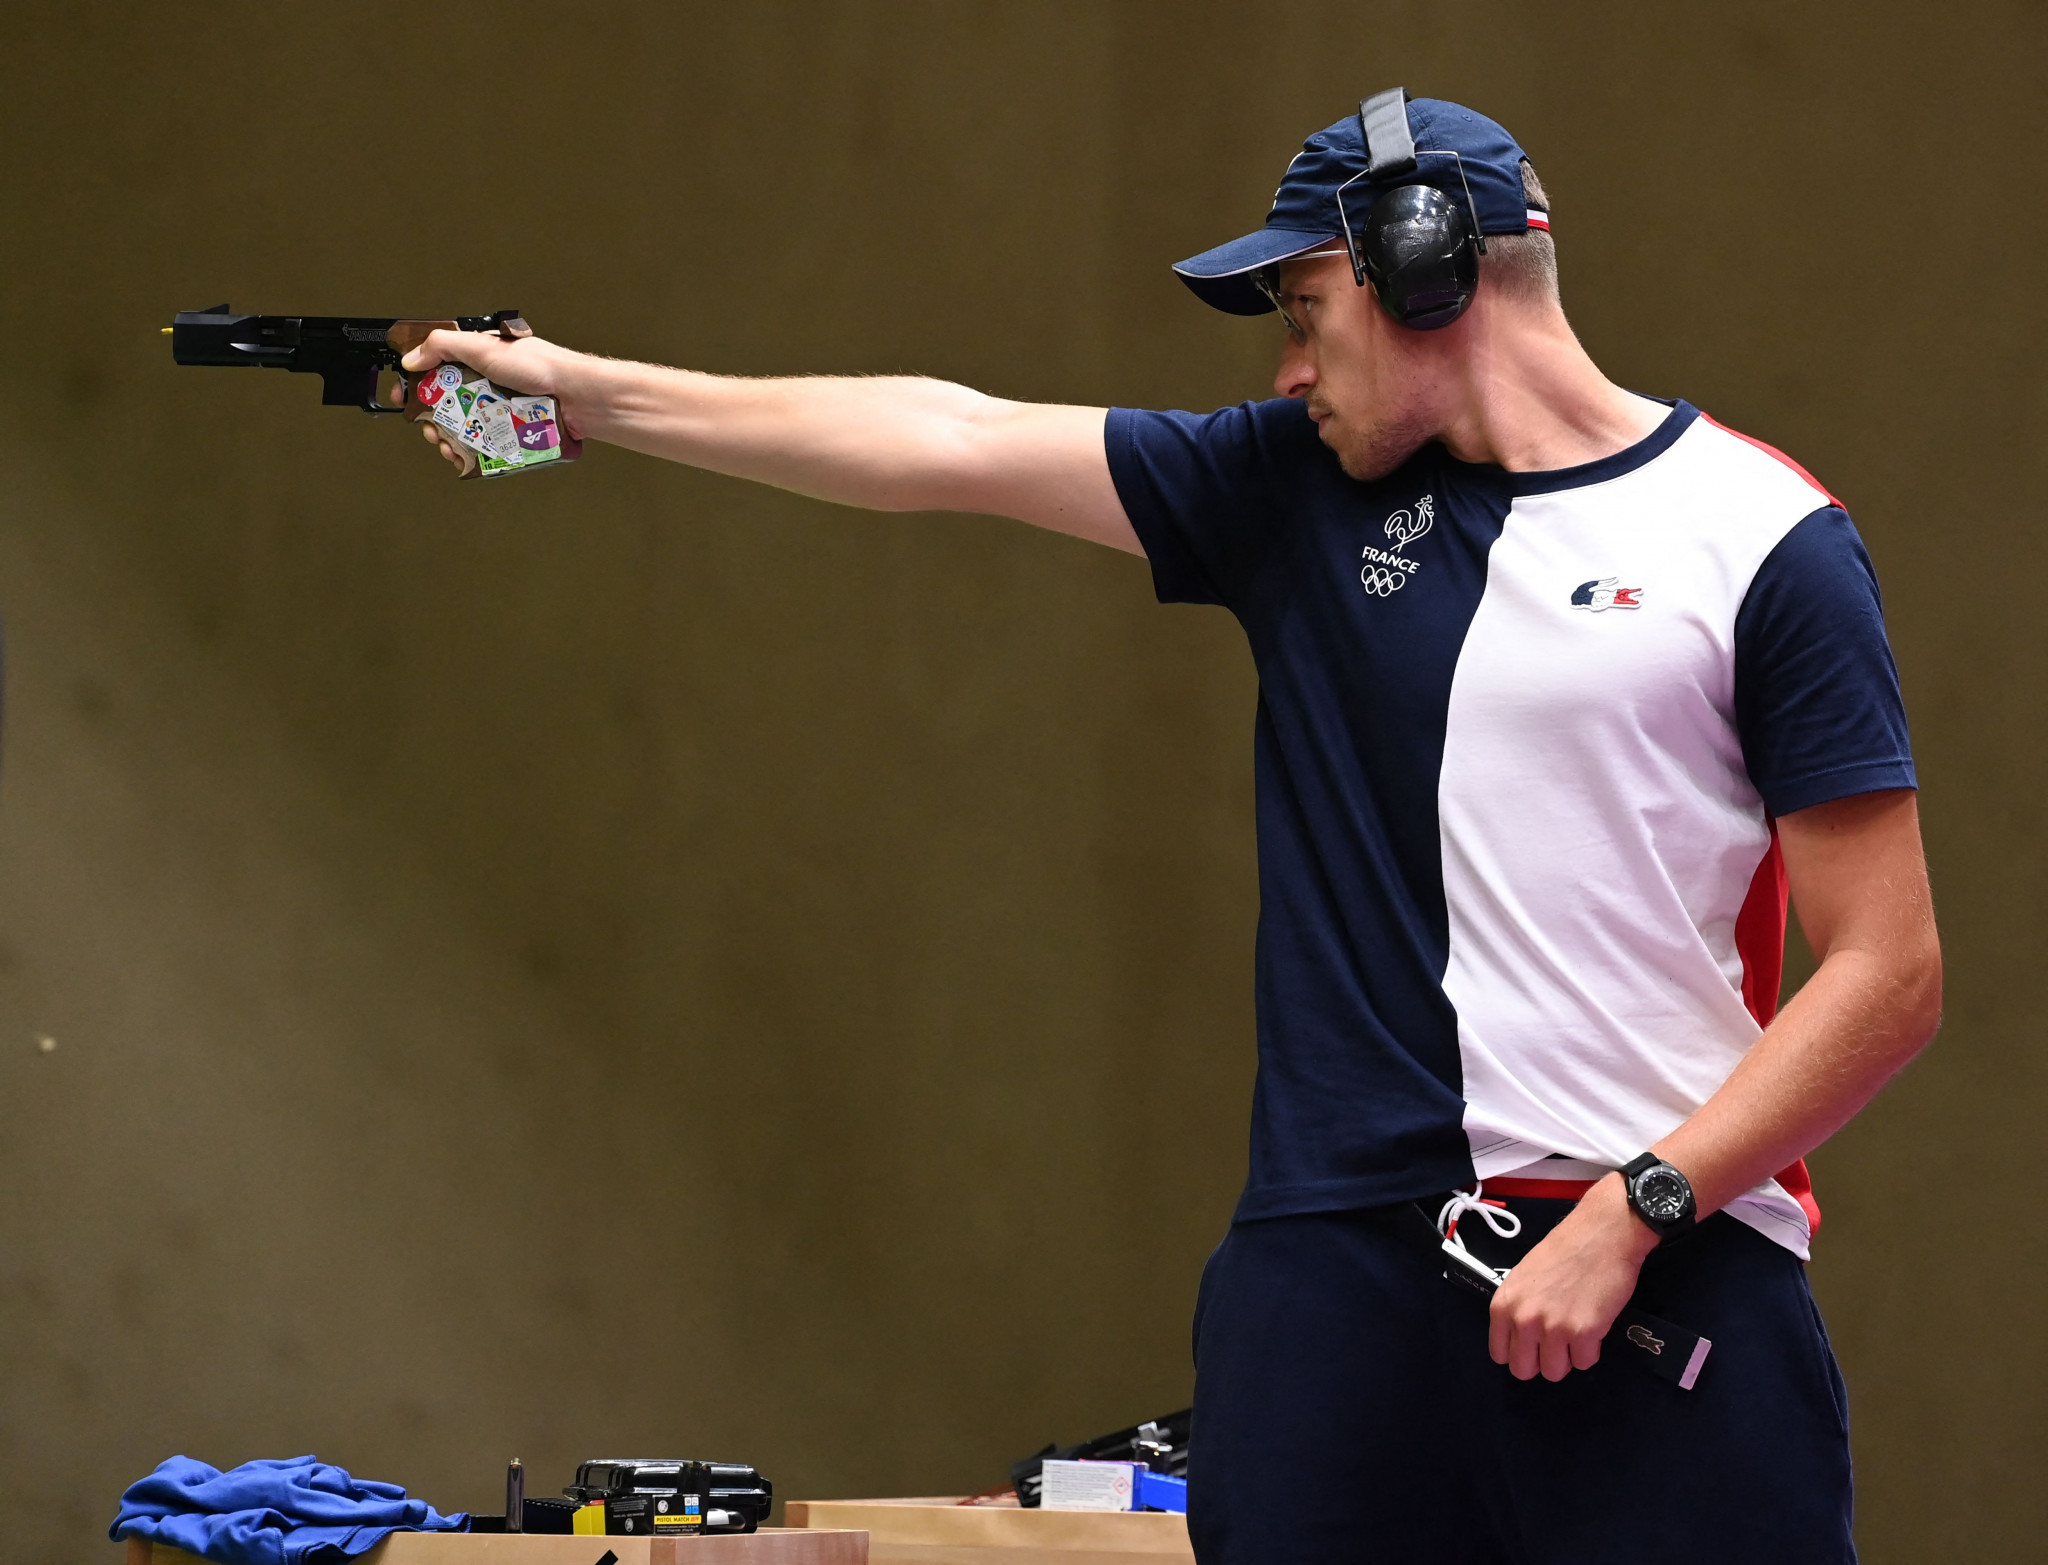 Site more than 150 miles from Paris now preferred venue for shooting at 2024 Olympics